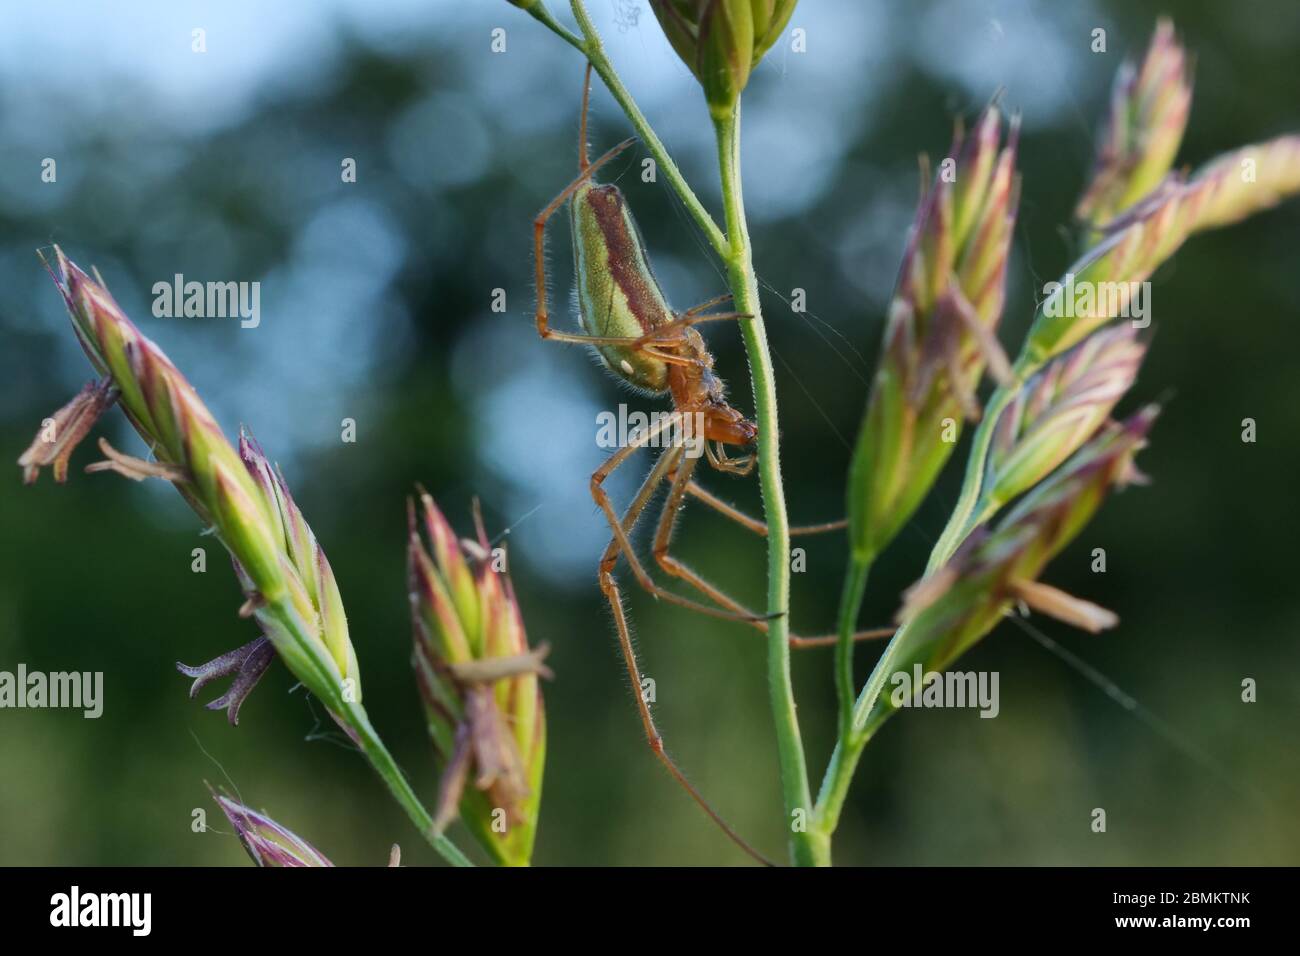 A little spider on flower in Brembo park, Dalmine, Lombardy, Italy Stock Photo